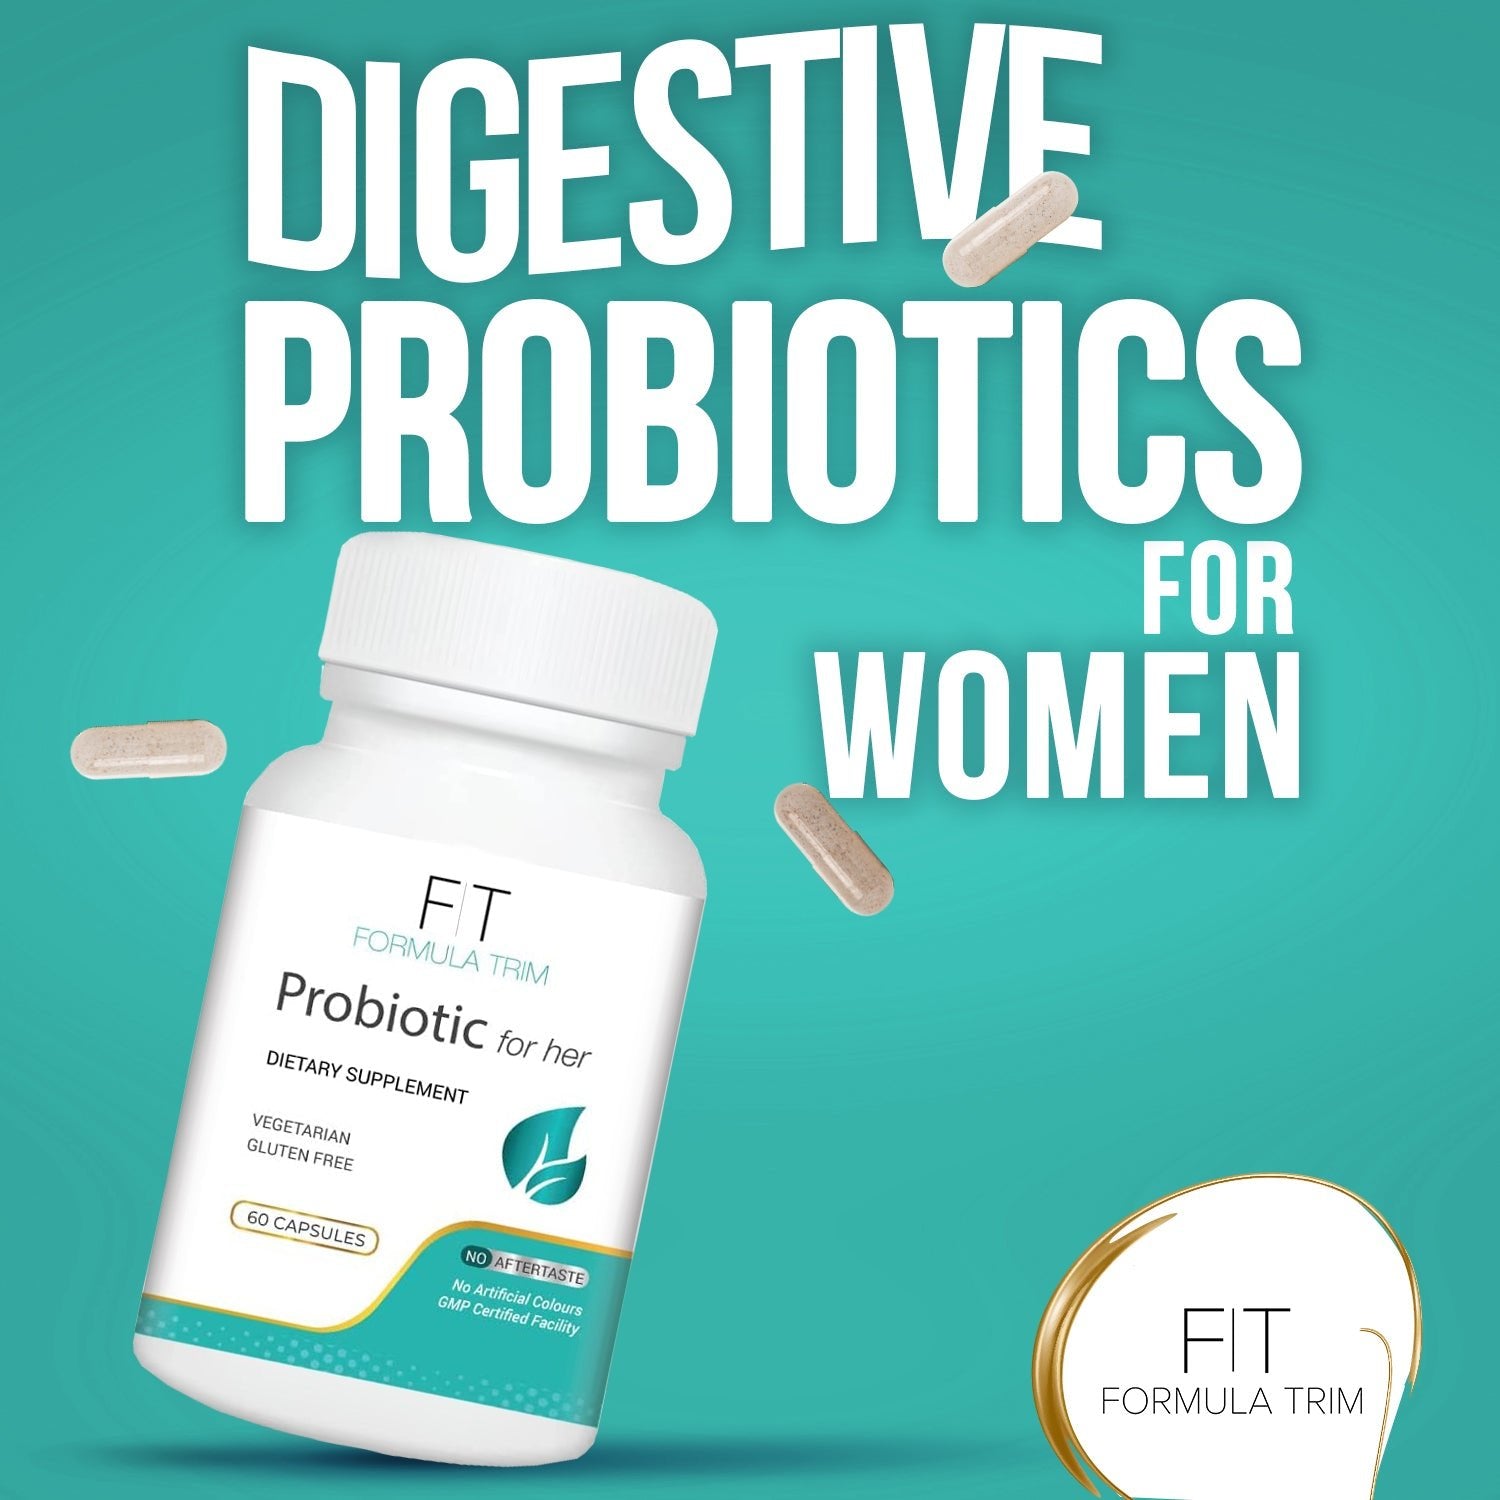 Probiotic For Her - BODY TRIM